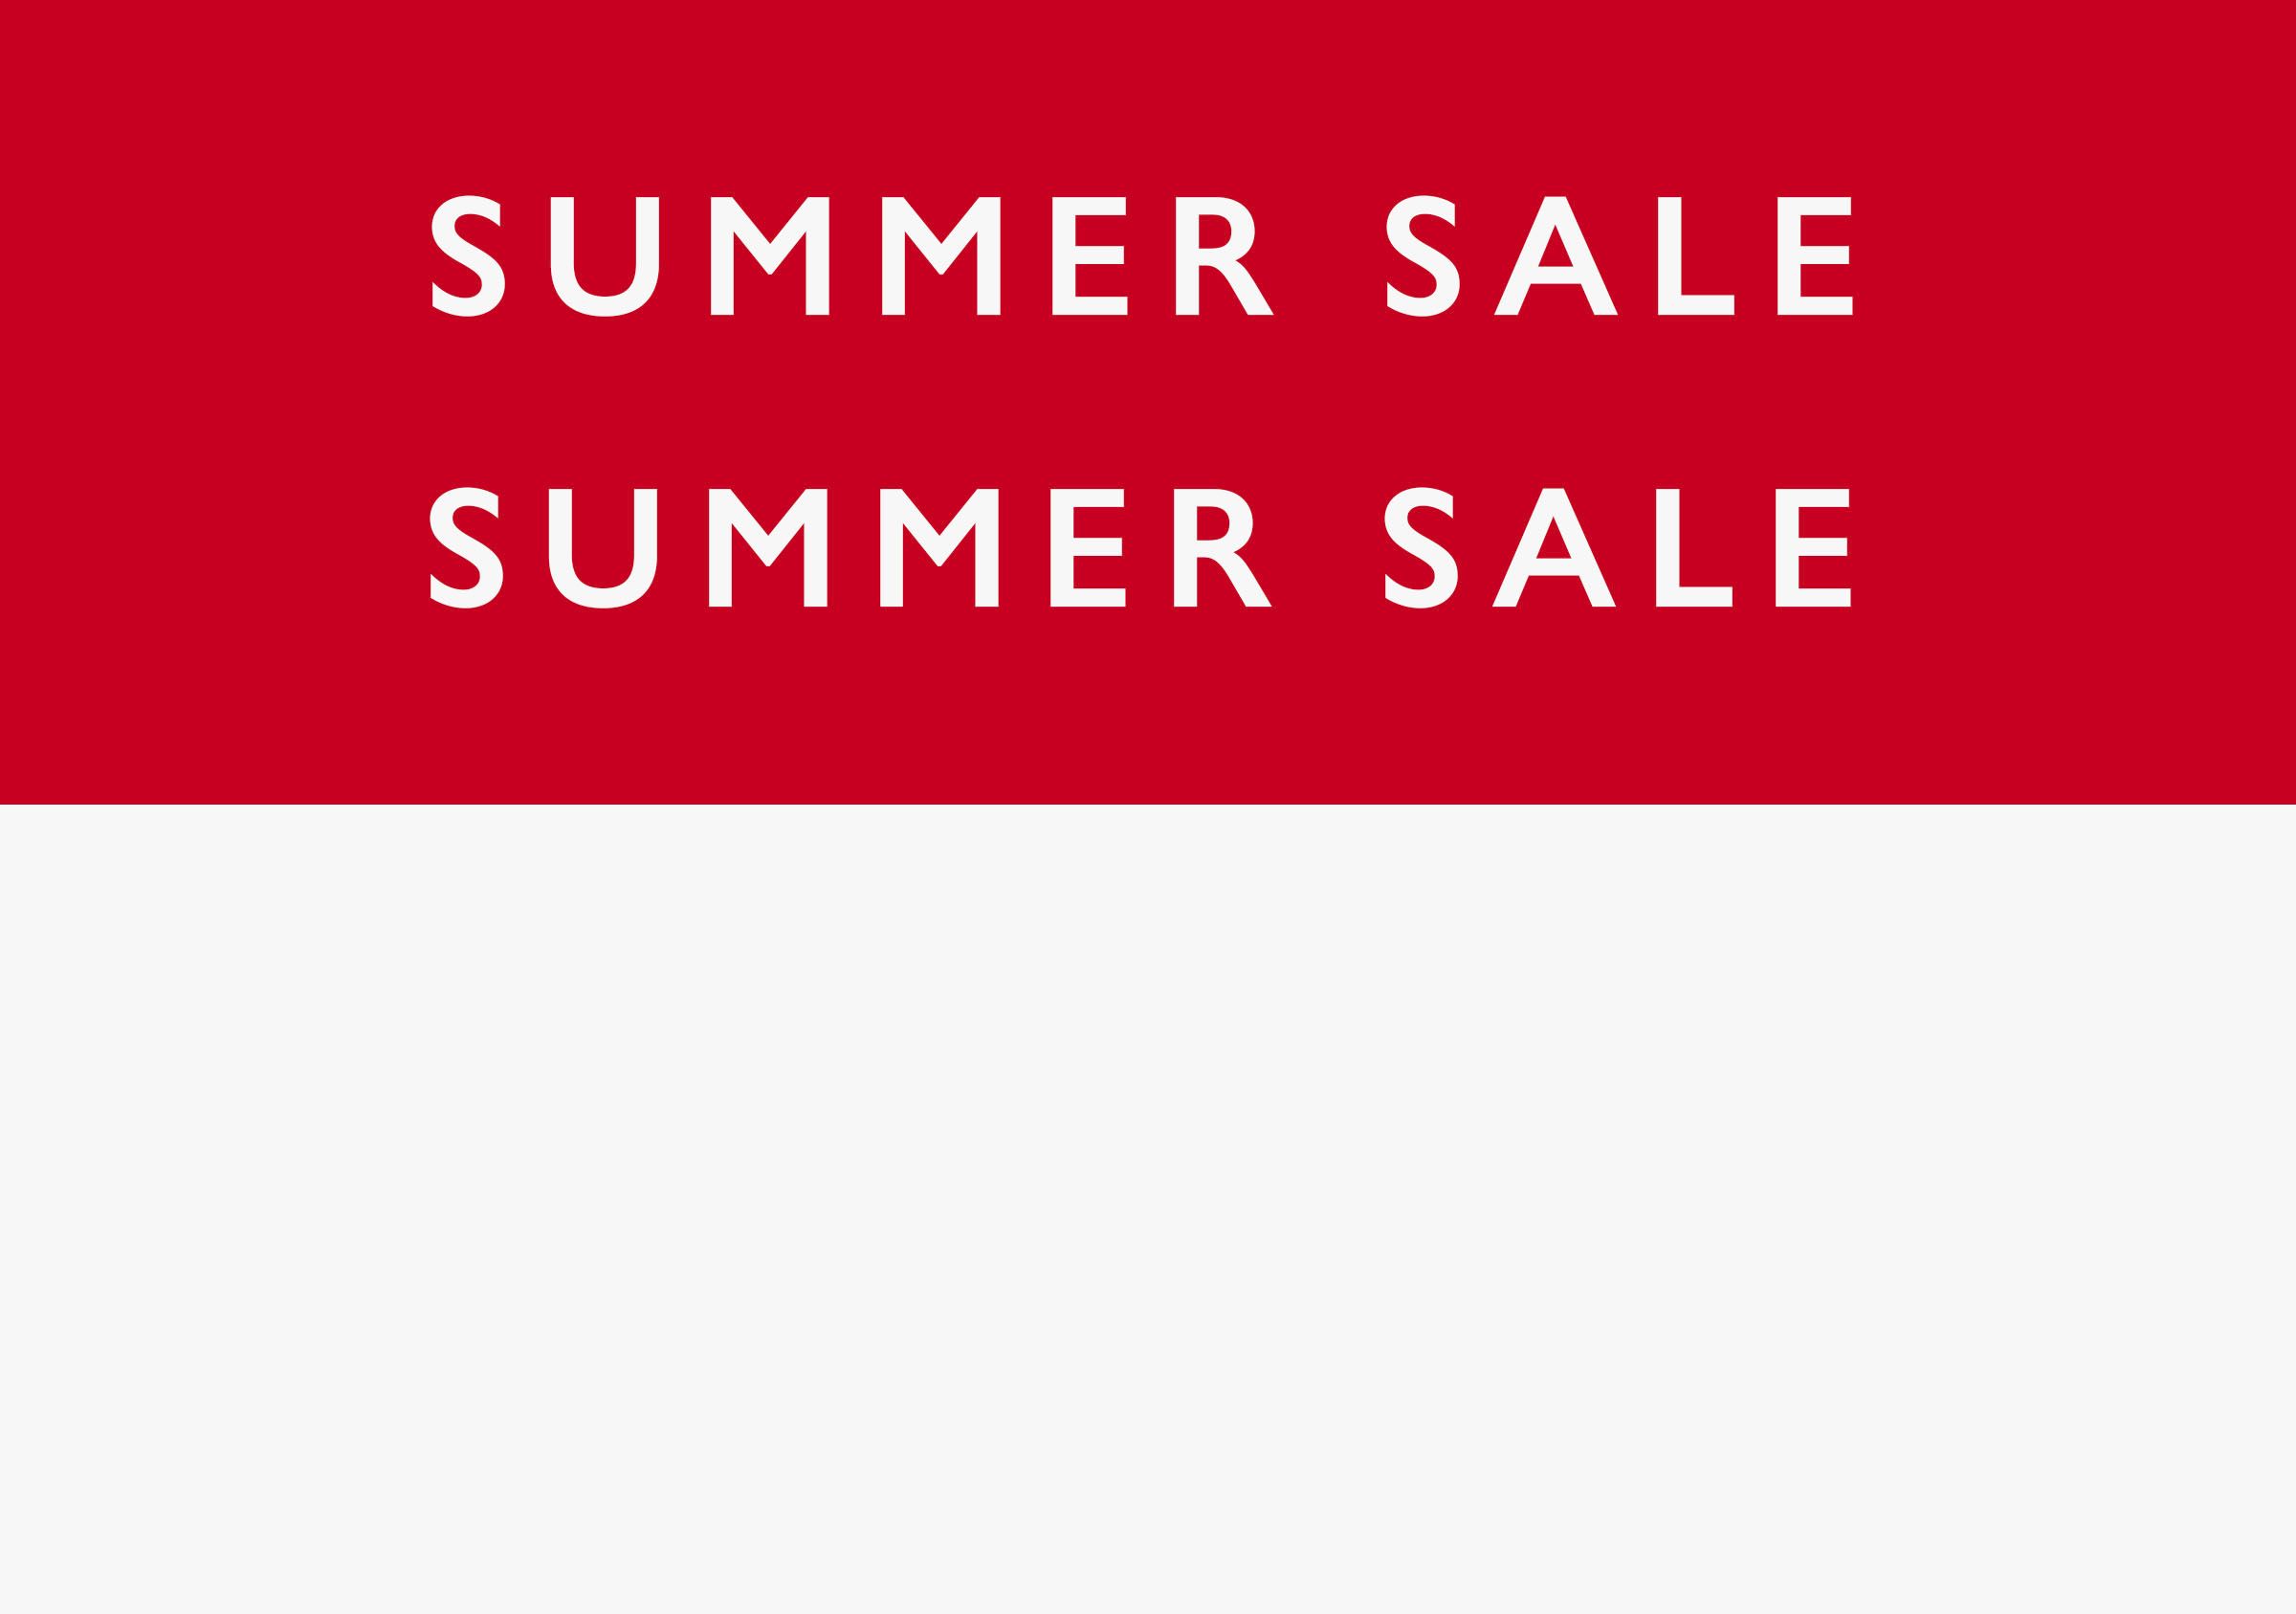 Summer Sale - Electrical Offers